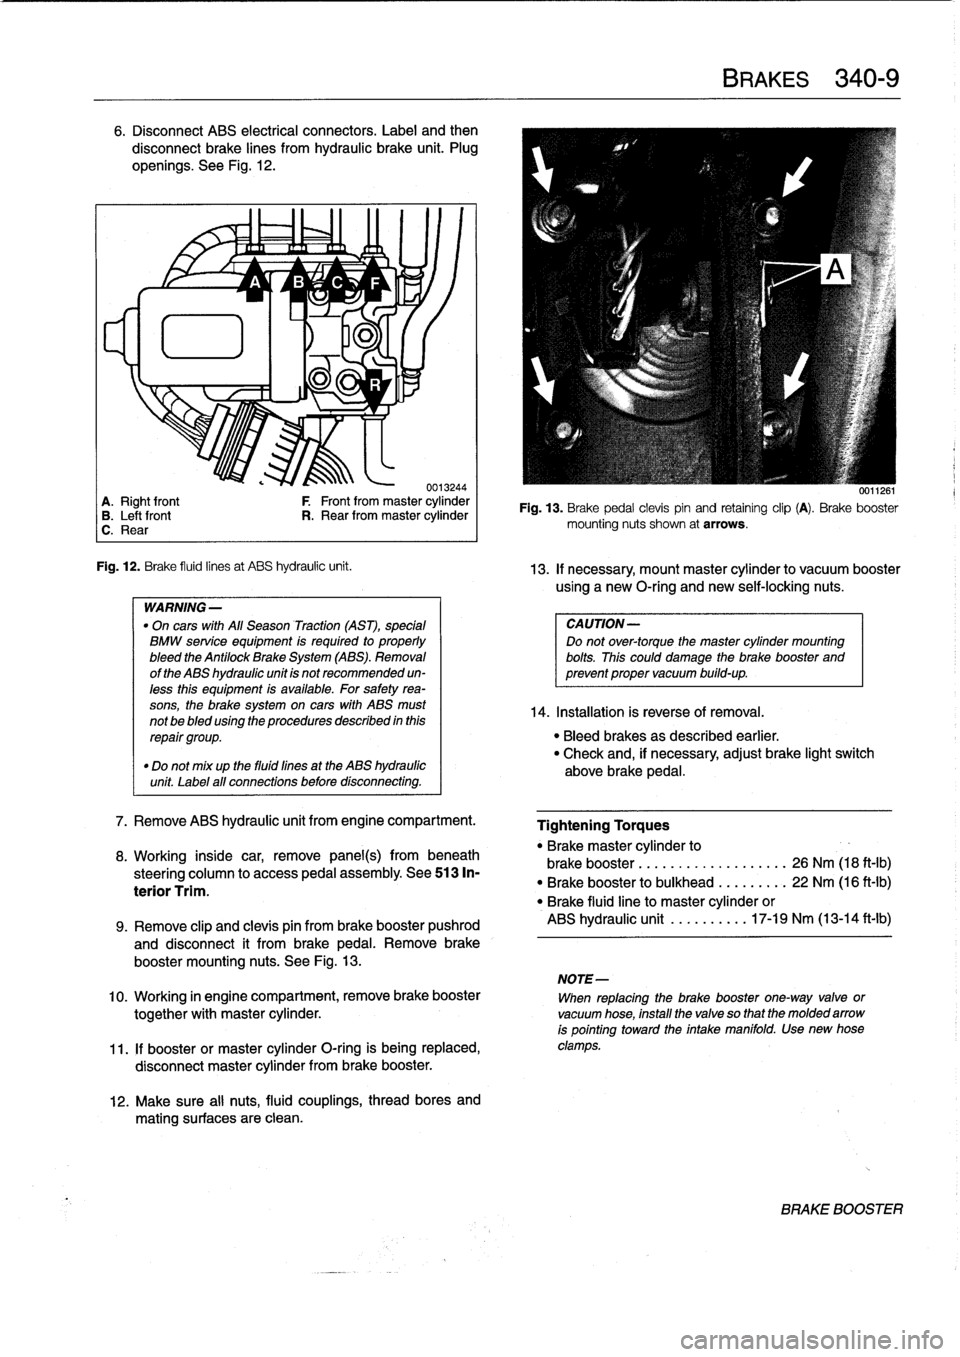 BMW 323i 1997 E36 Service Manual 6
.
Disconnect
ABS
electrical
connectors
.
Label
and
then

disconnect
brake
lines
from
hydraulic
brake
unit
.
Plug

openíngs
.
See
Fig
.
12
.

~
~
A
1/
B
1v
C
~
F

lu
11
-ri
J
.

0013244
A
.
Right
f